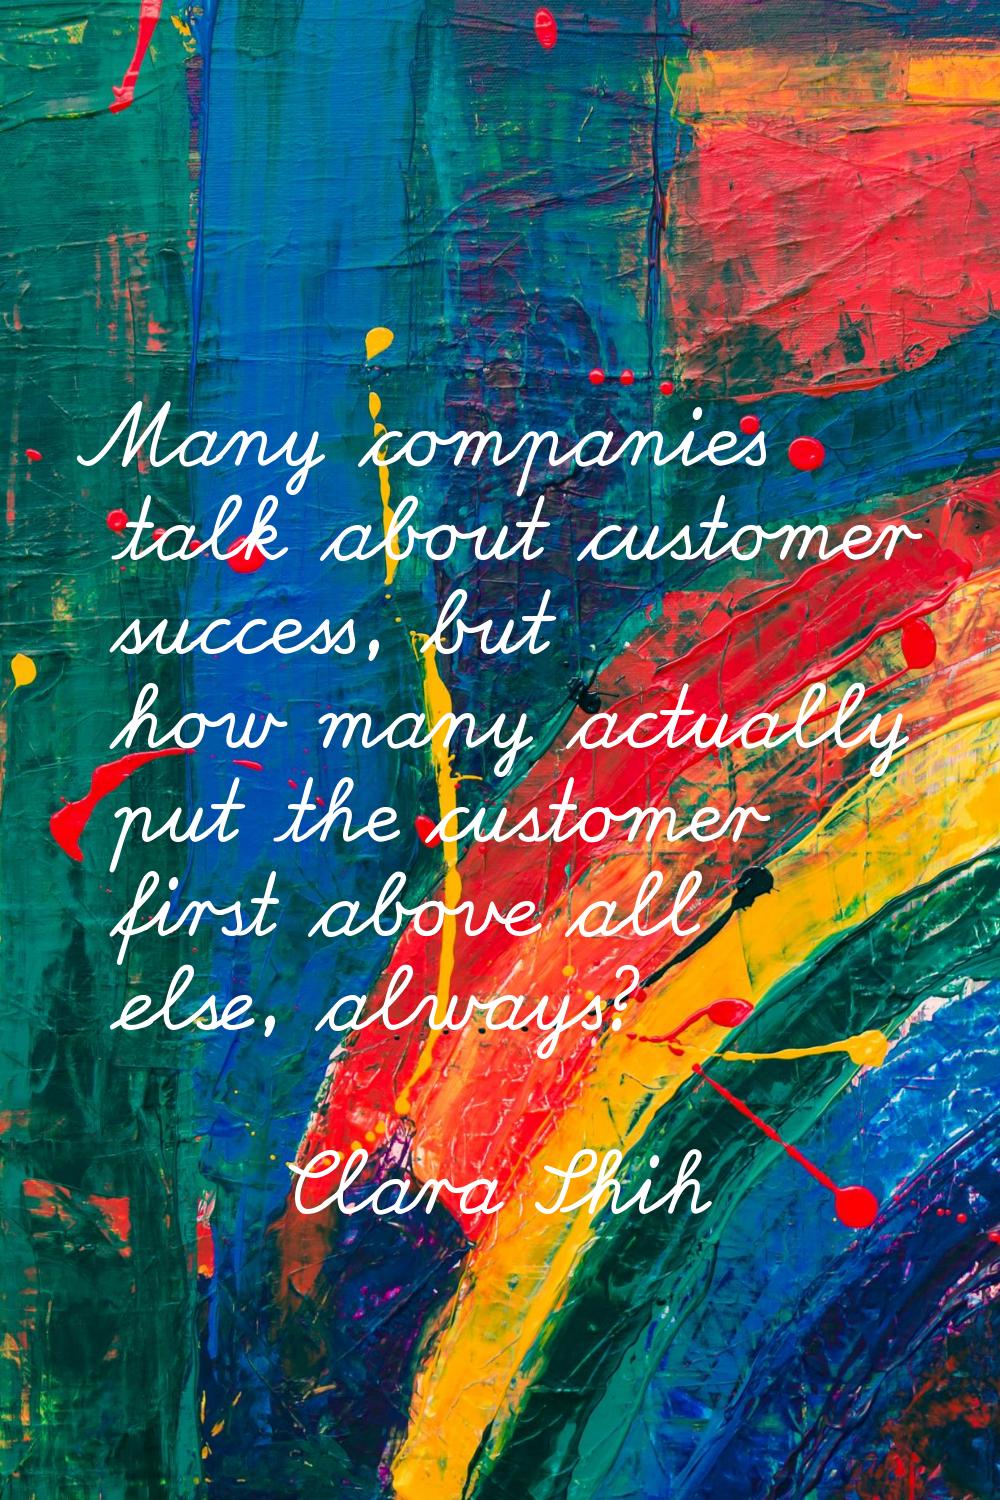 Many companies talk about customer success, but how many actually put the customer first above all 